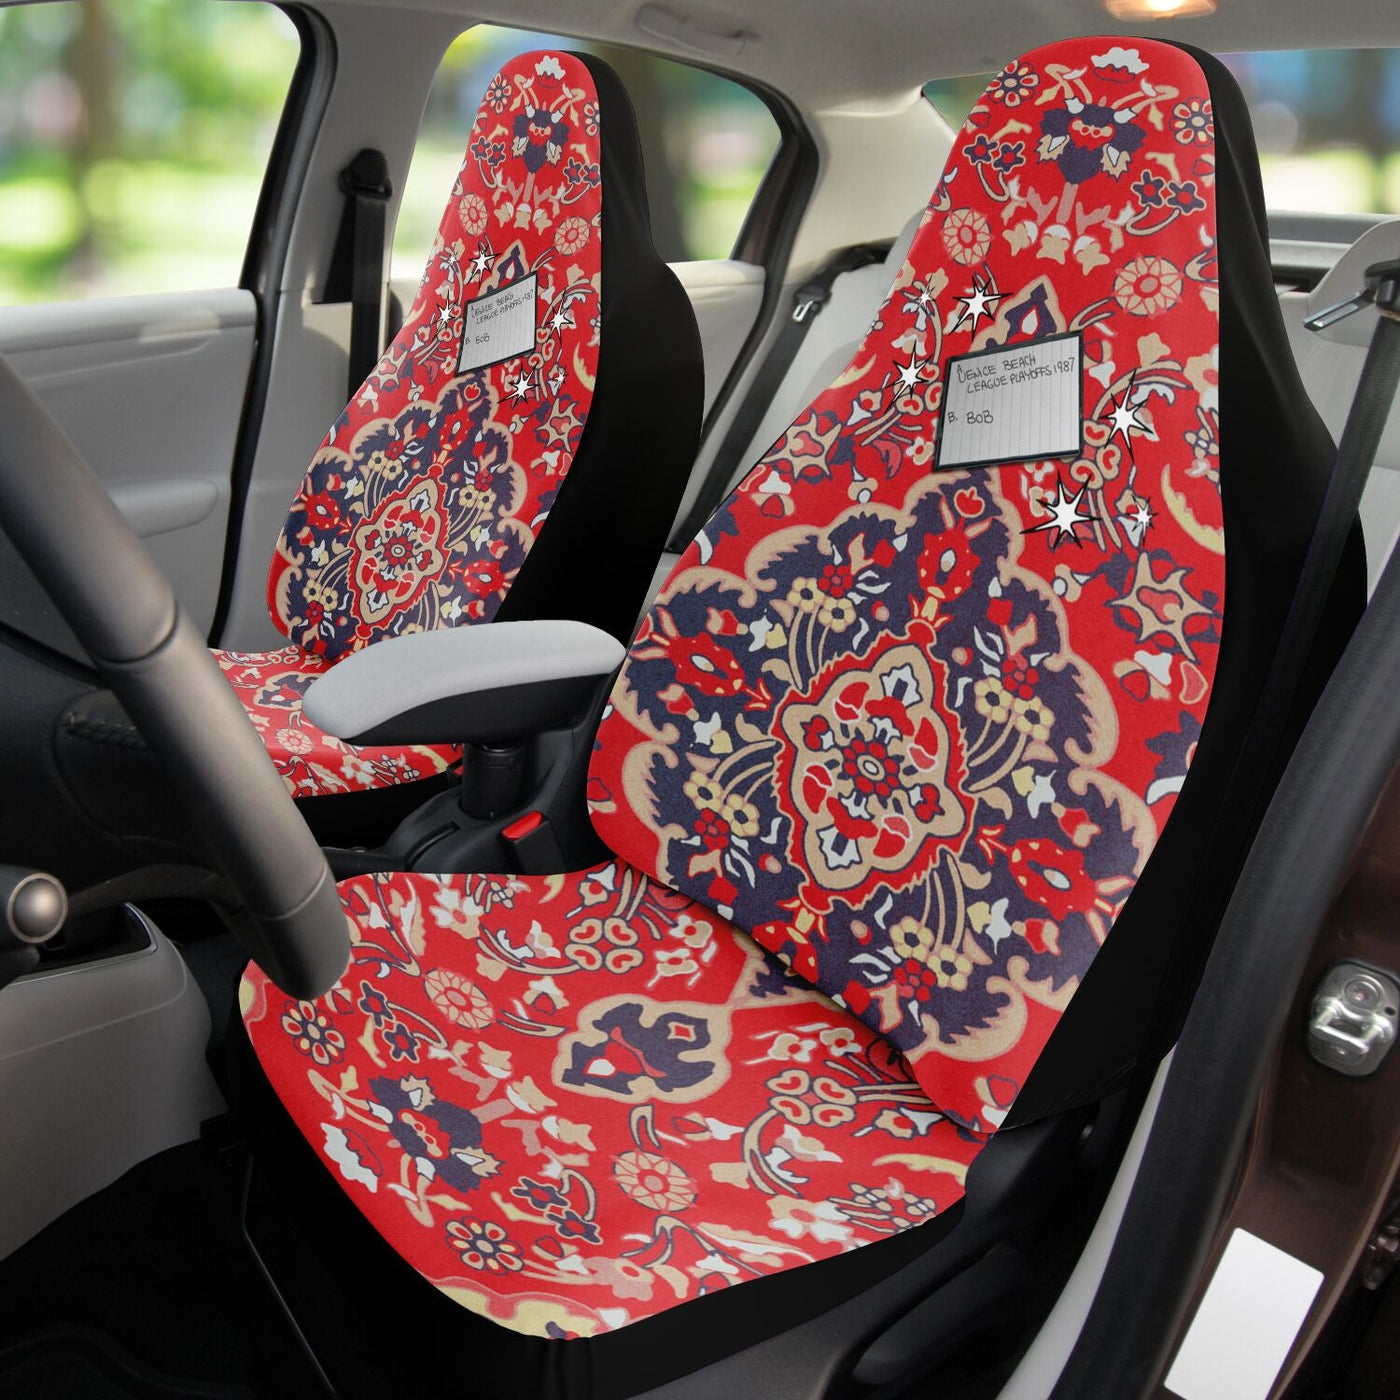 The Dude's Rug With Lebowski Bowling Tape Car Seat Covers